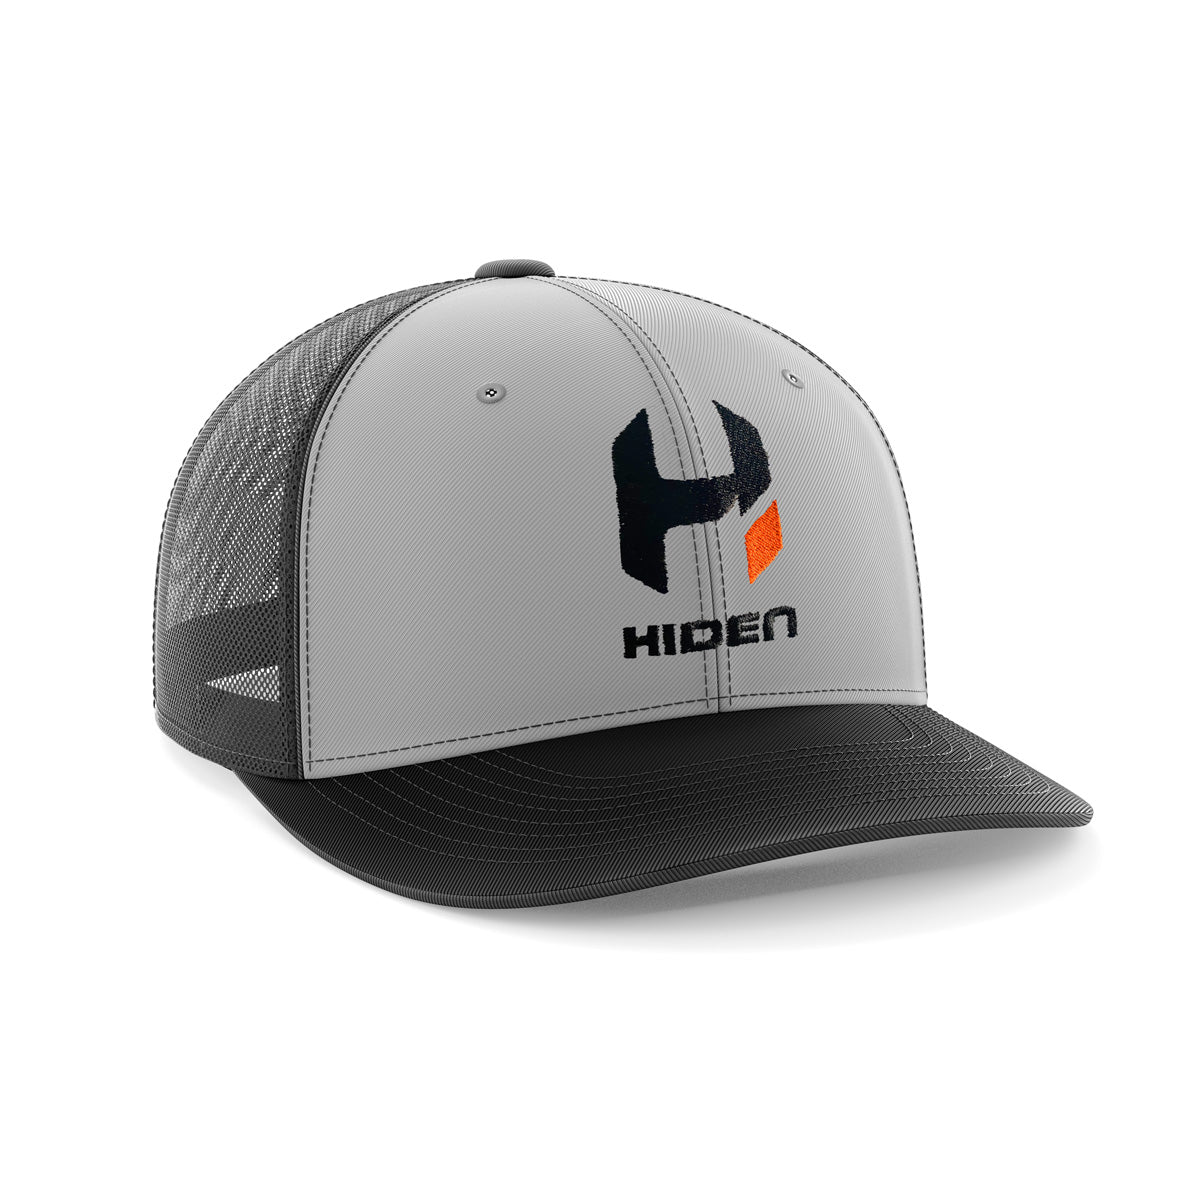 Hiden Charcoal/Grey Curved Snapback Hat